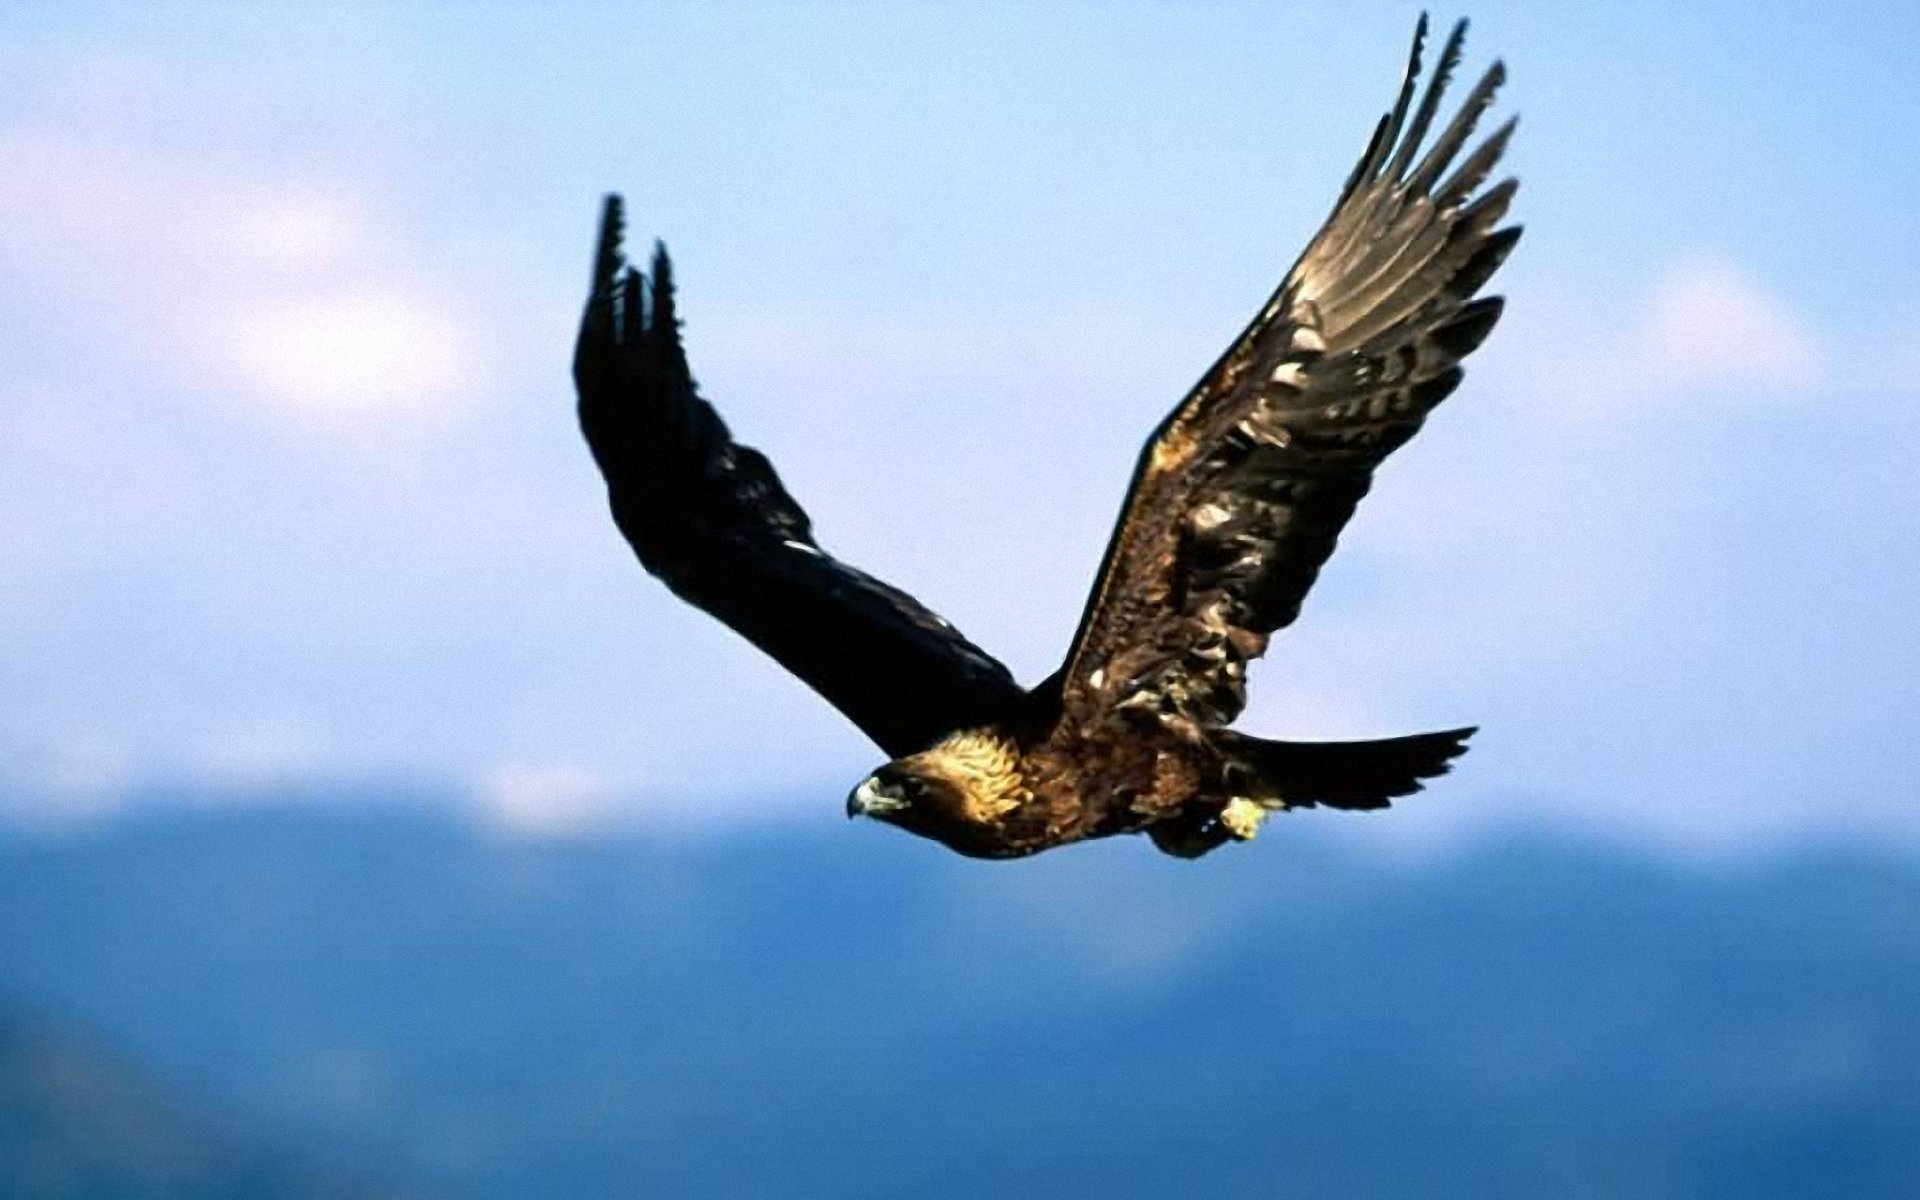 Eagle Flying 1920x1200 WallpapersEagle 1920x1200